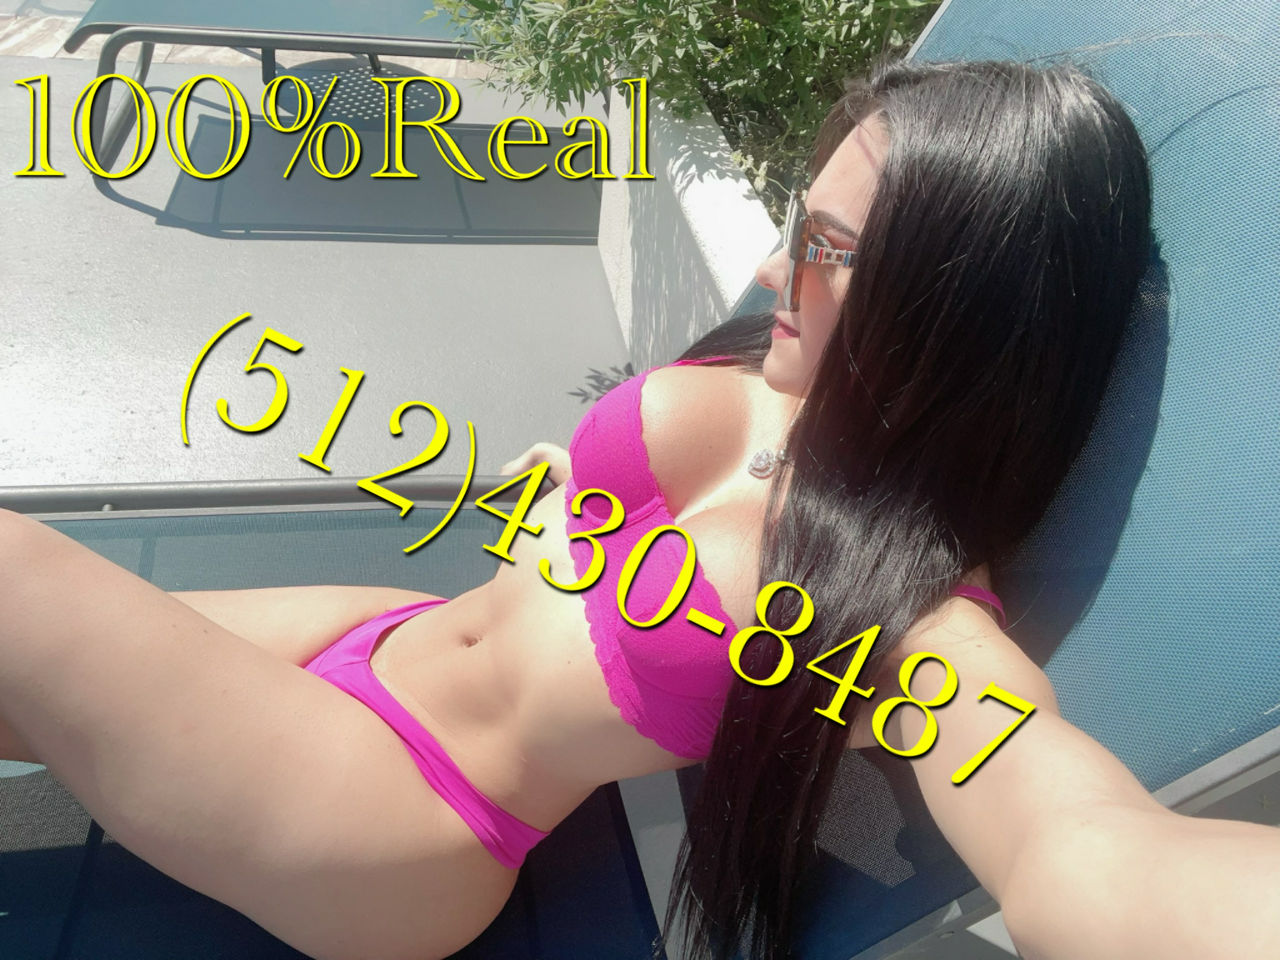 Escorts Secaucus, New Jersey last day here